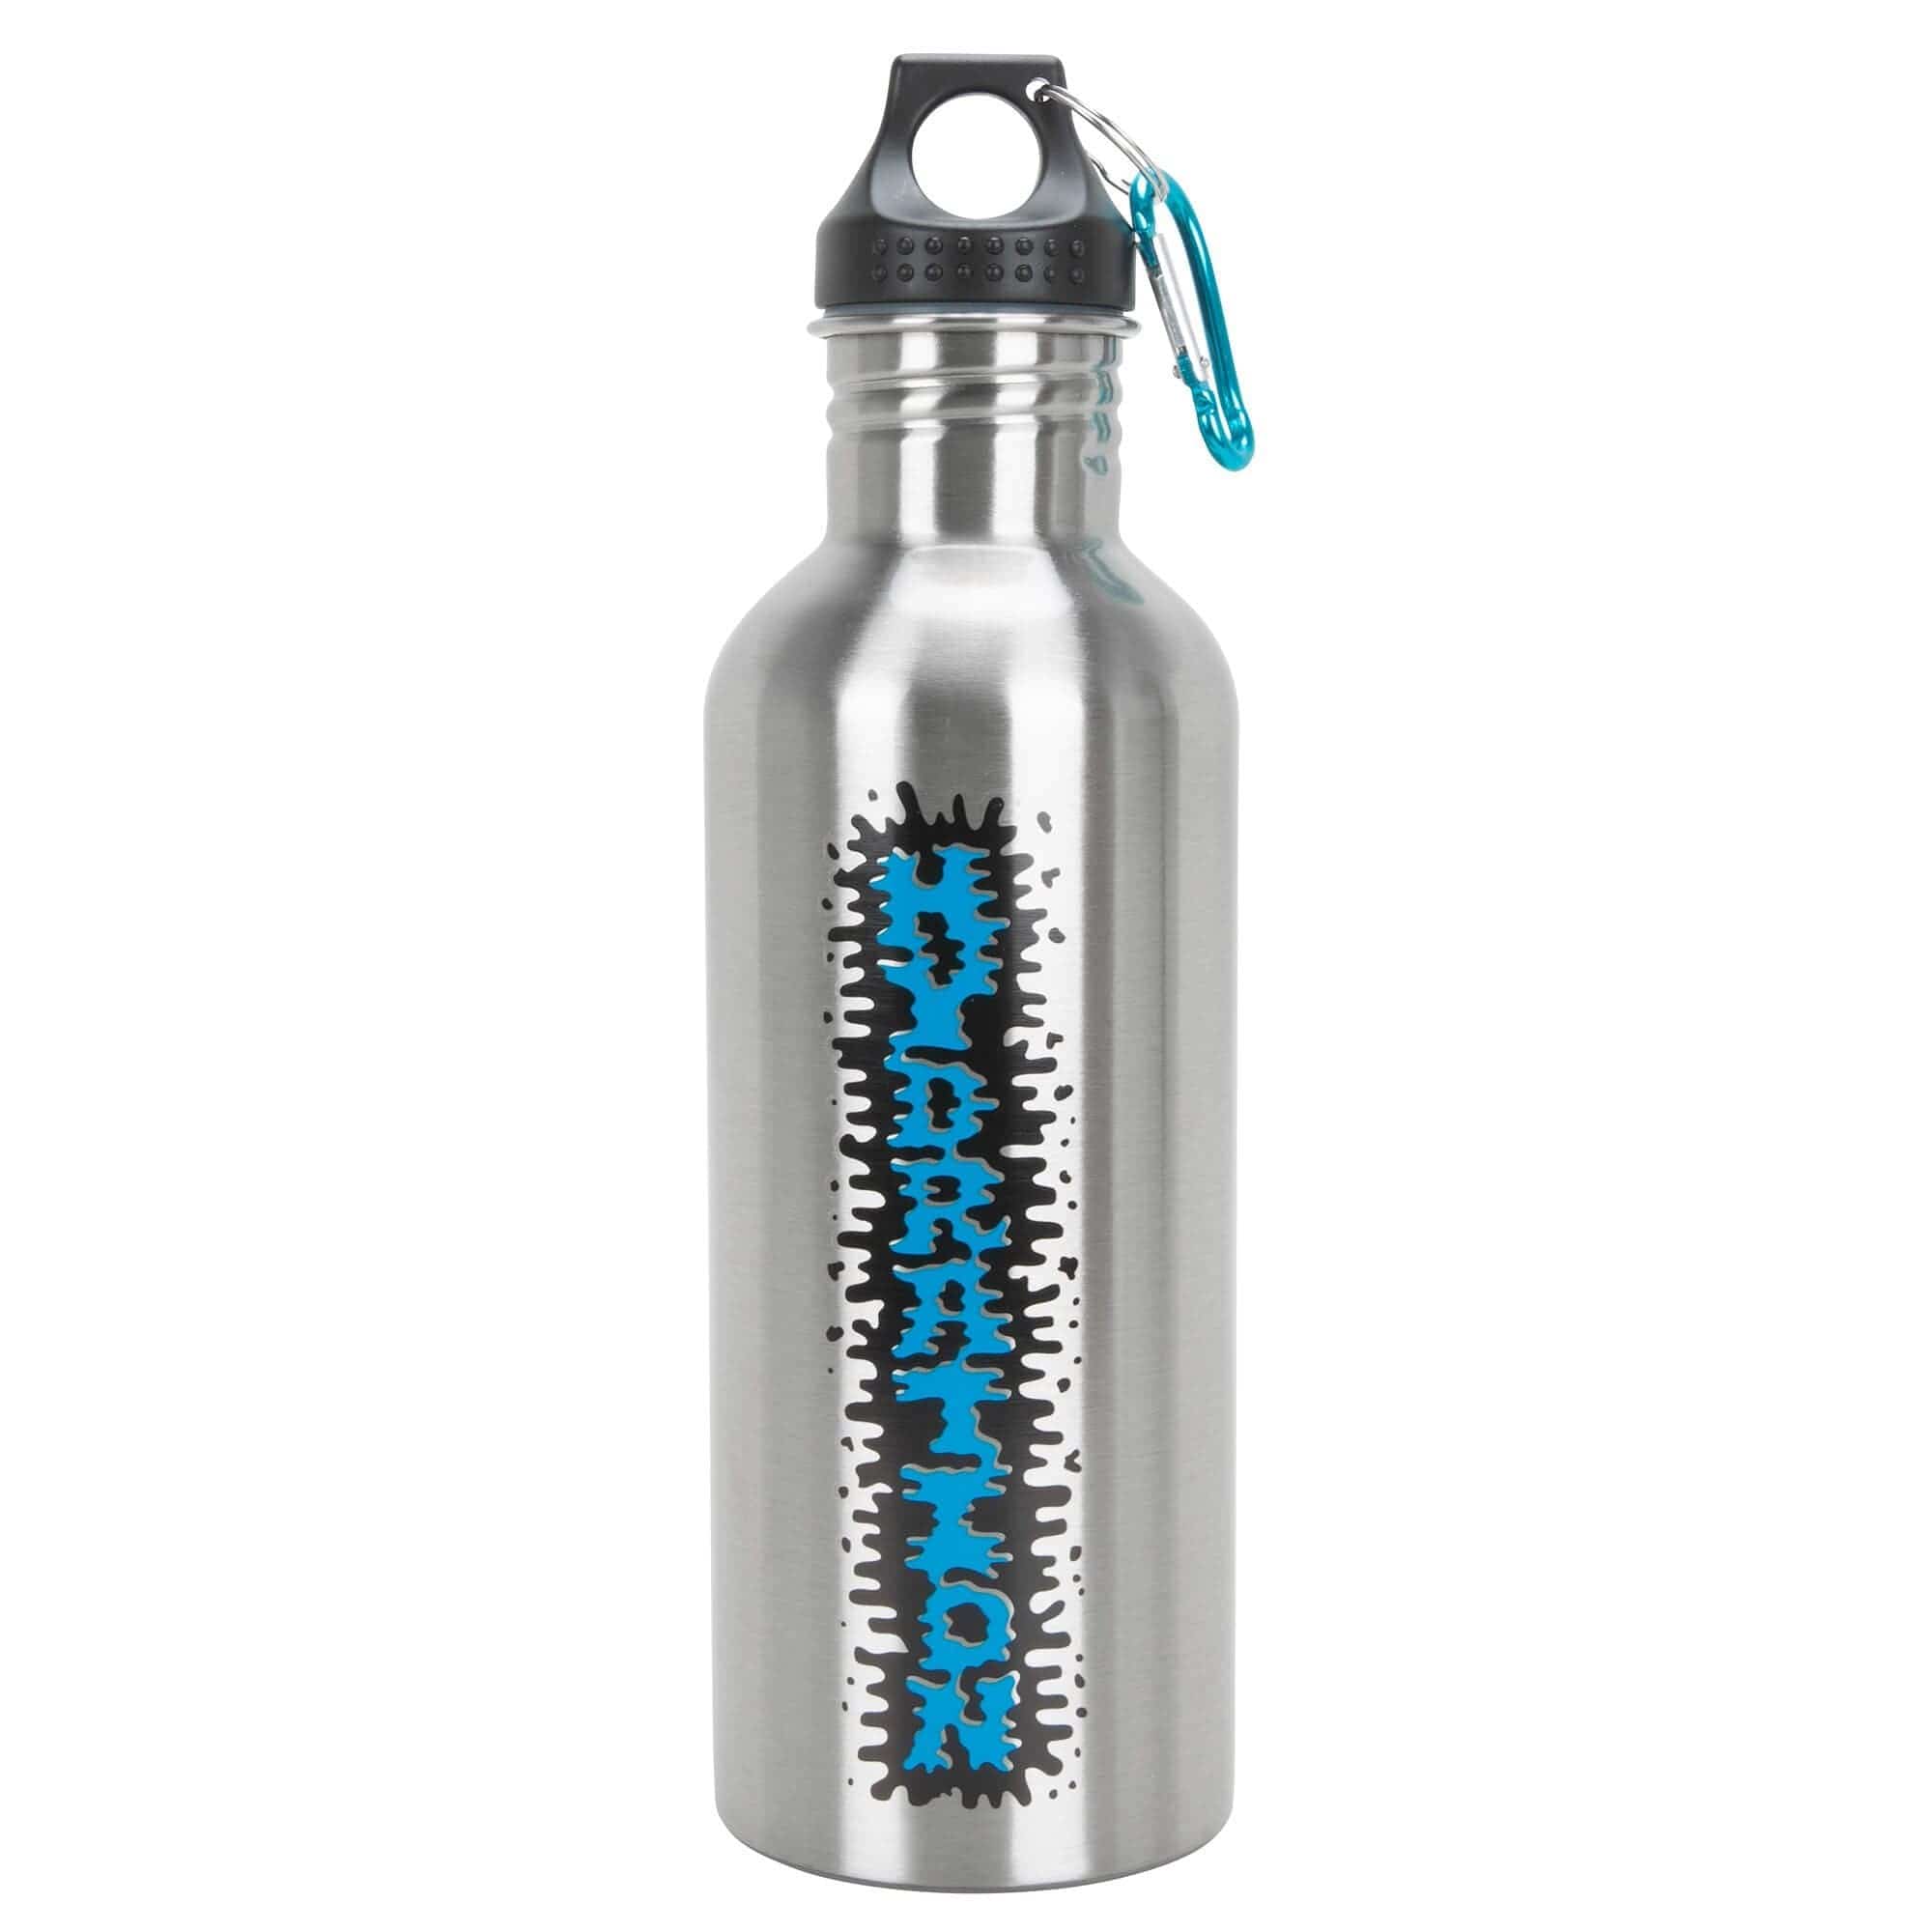 https://www.lowbrowcustoms.com/cdn/shop/products/010610-lowbrow_customs-stainless_steel_water_bottle_and_black_carrier_2.0_combo-2_2f8a4323-5fde-4364-8adb-3ae36bb5ee8e_2000x.jpg?v=1622171381